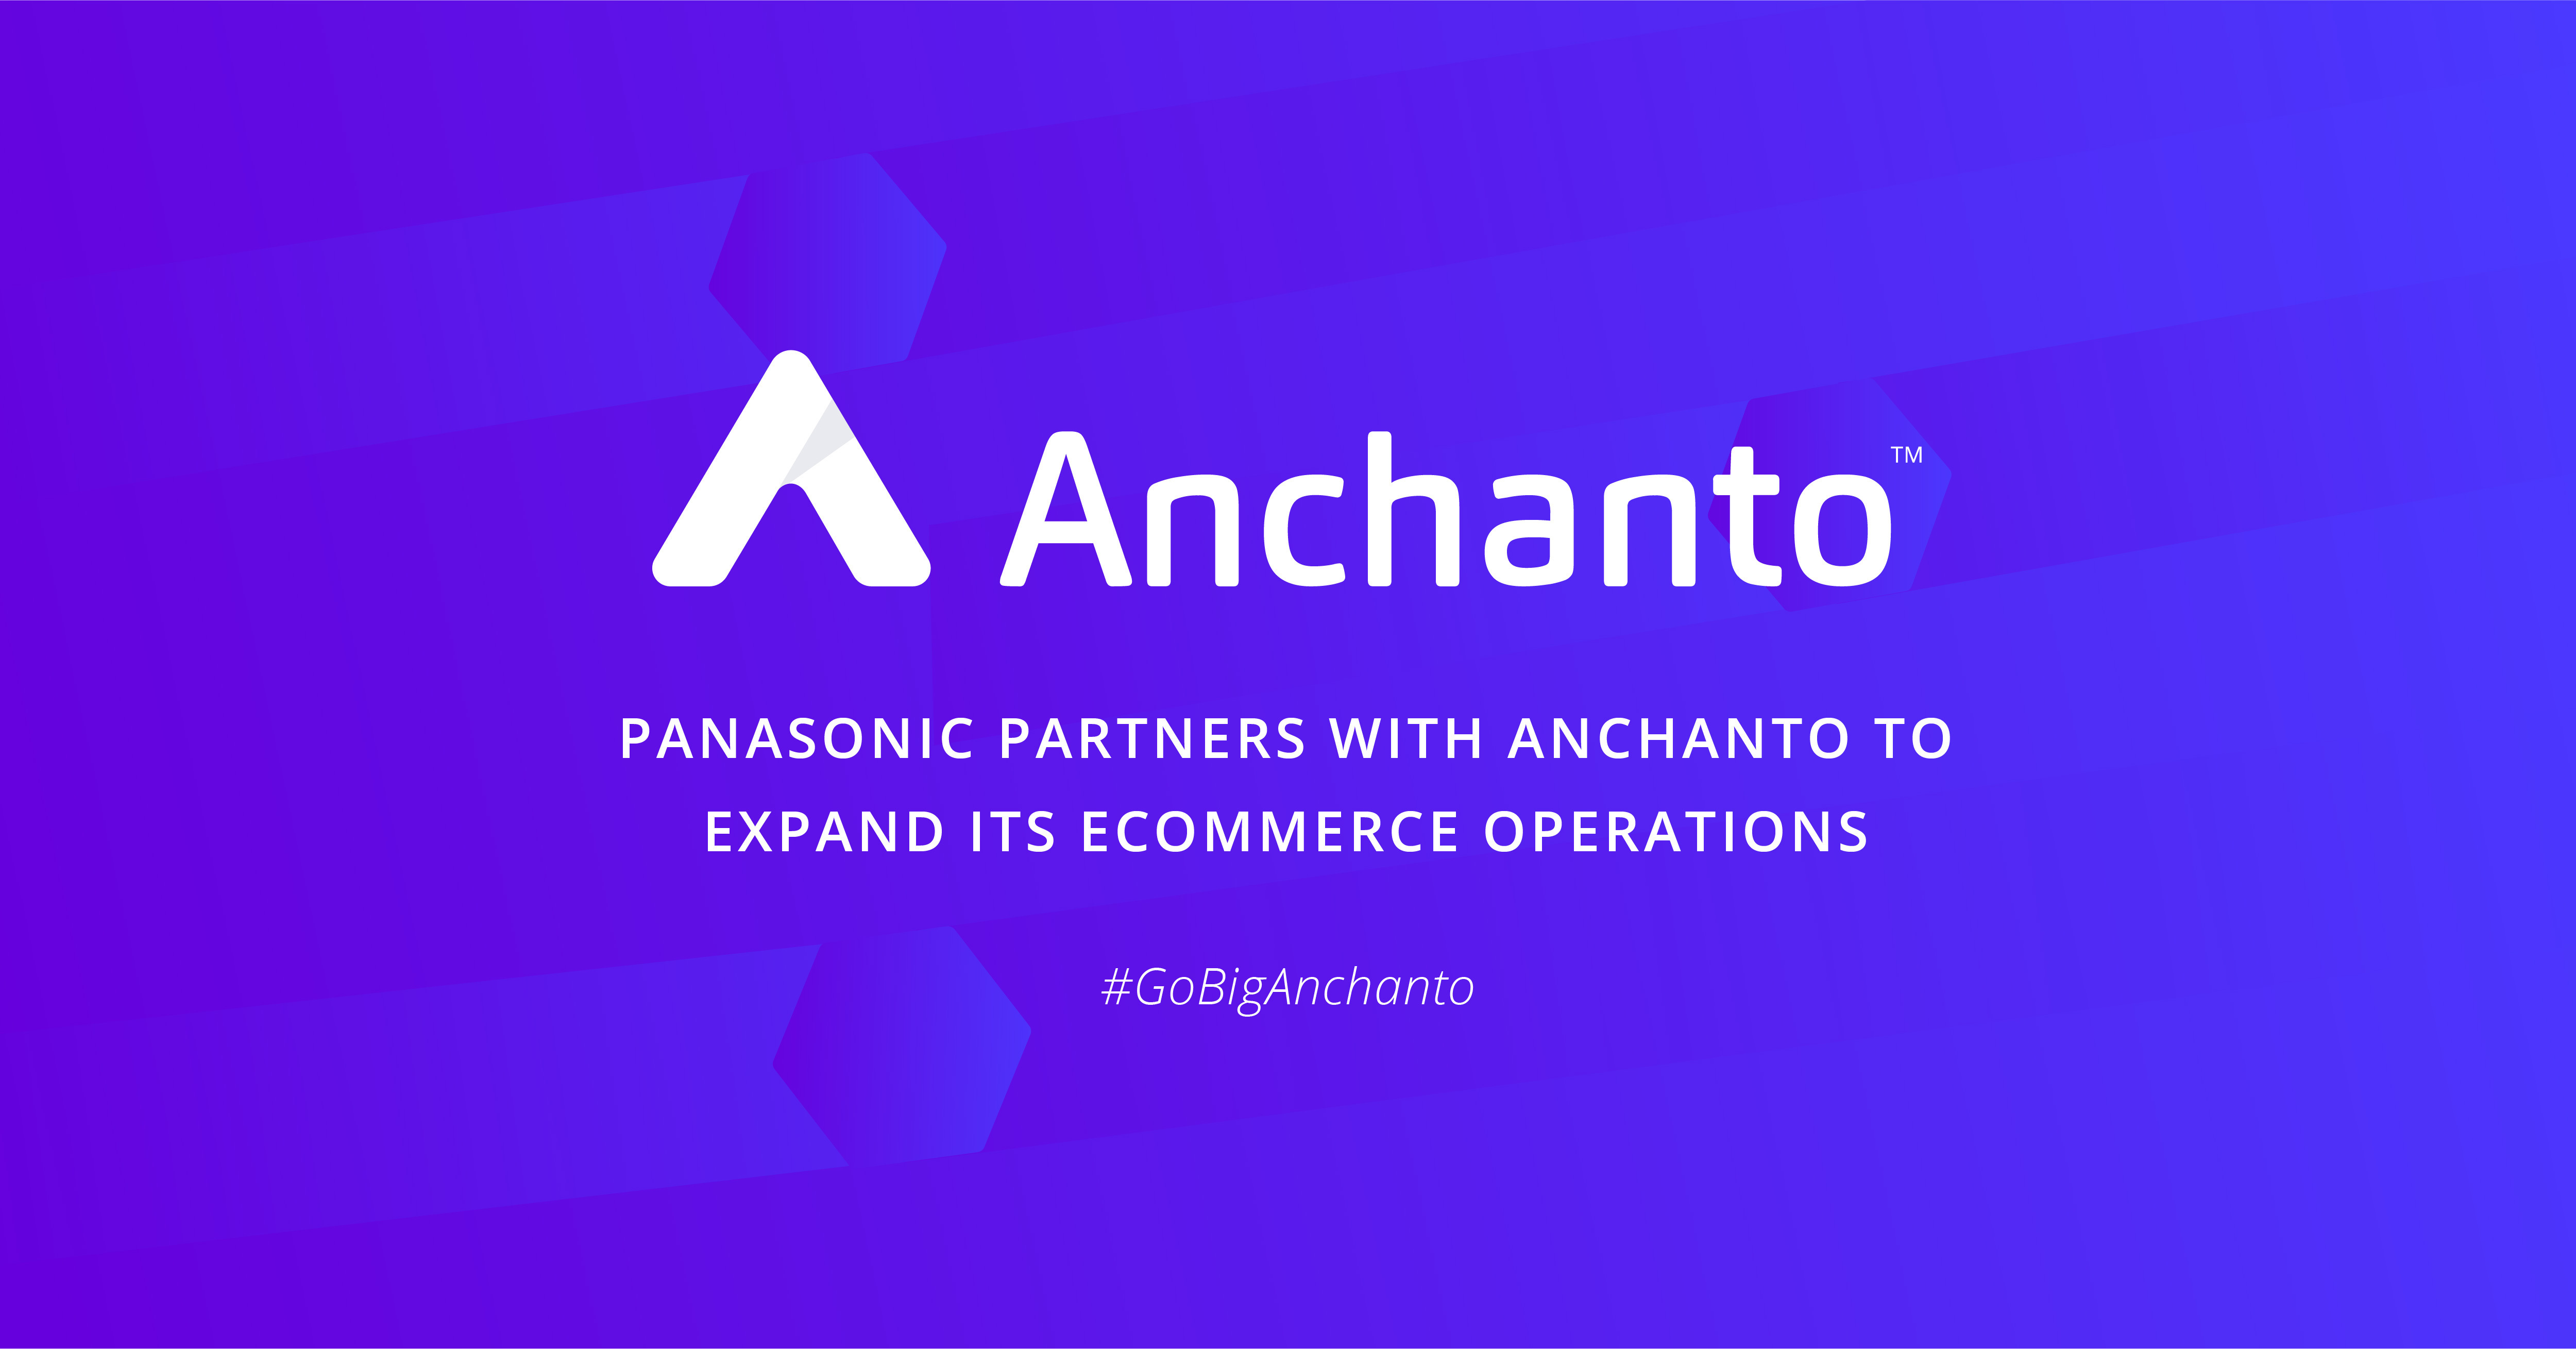 panasonic_partners_with_anchanto_to_expand_its_ecommerce_operations